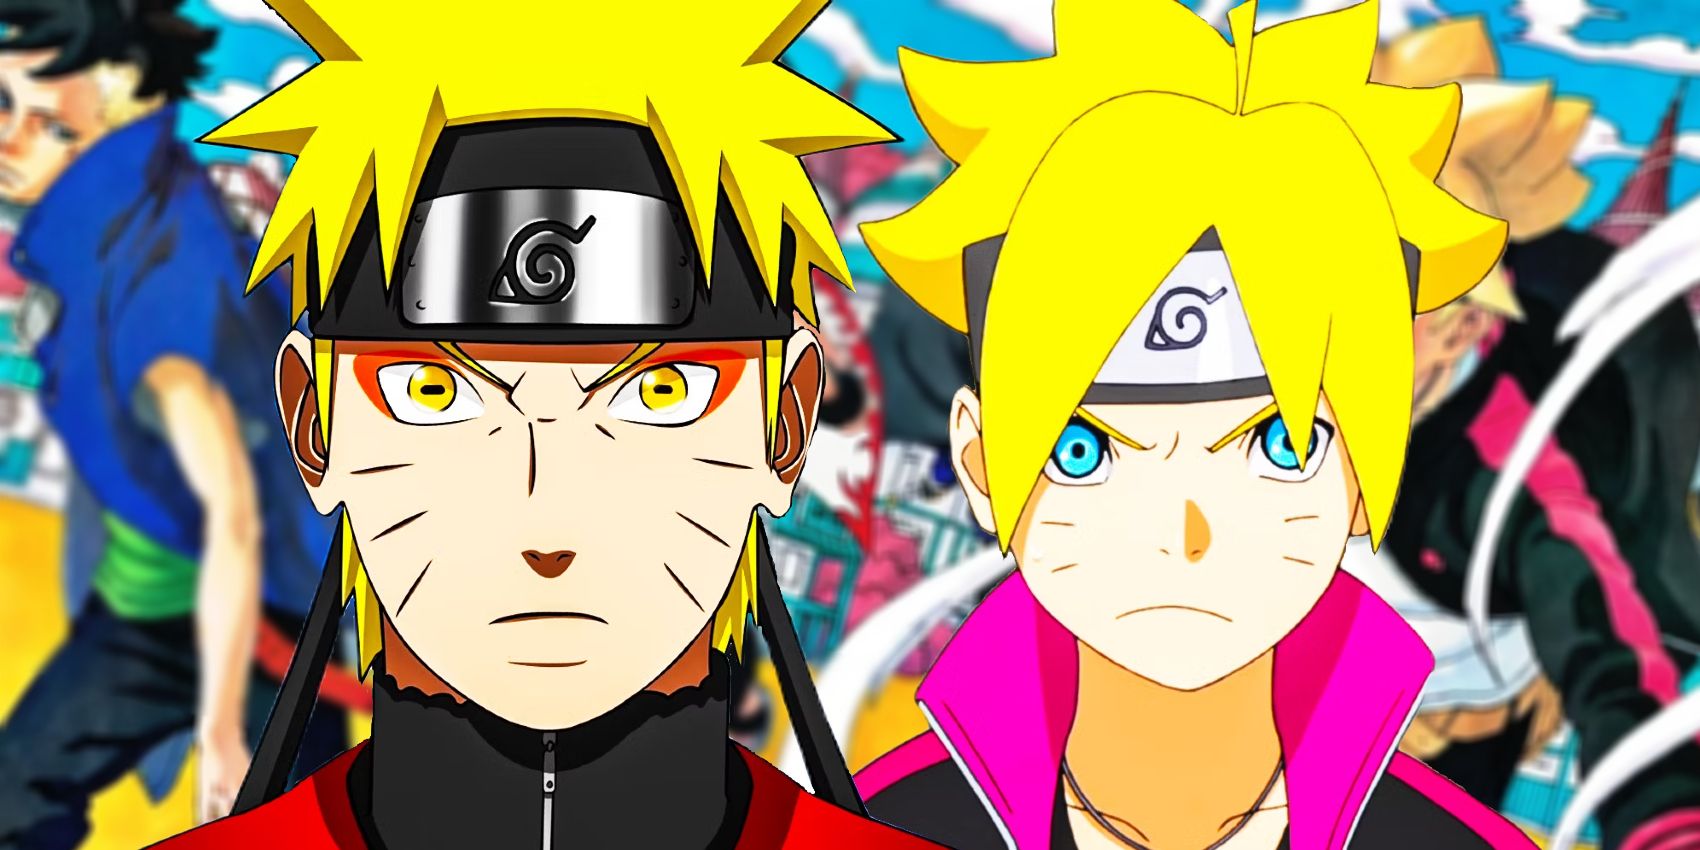 Naruto and Boruto featured in a collage style image layered in front of Boruto characters.